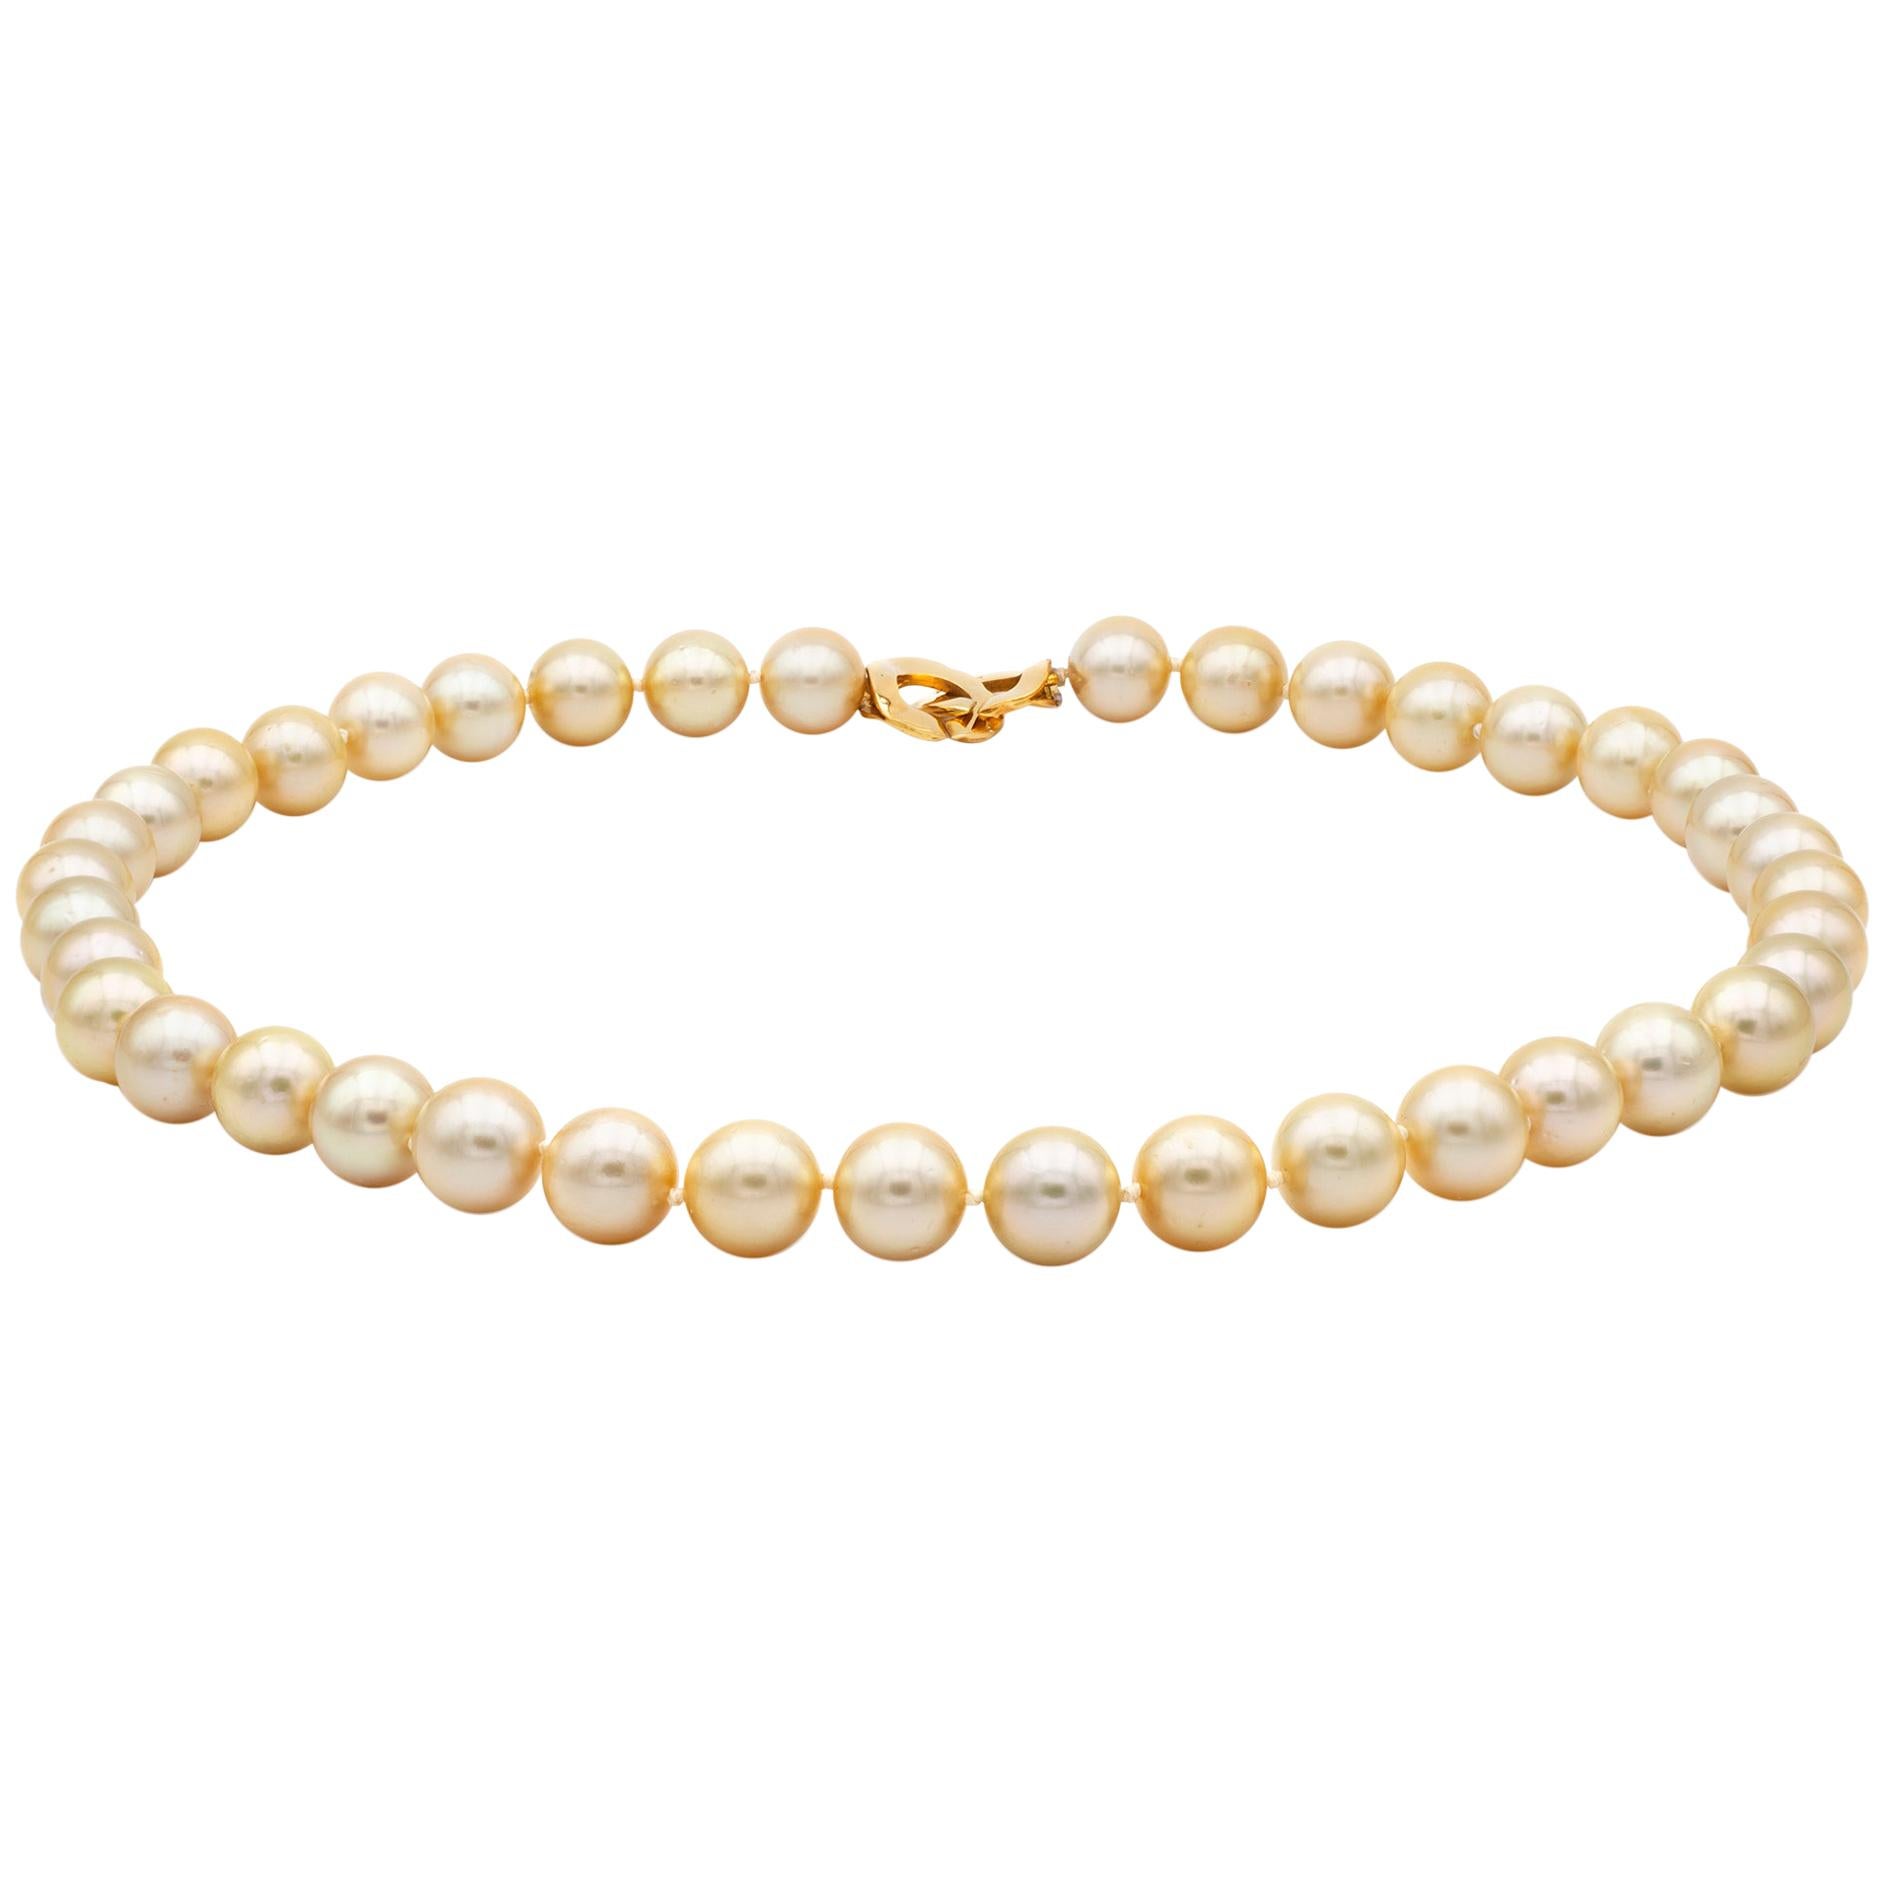 Golden Color South Sea Cultured Pearl Necklace